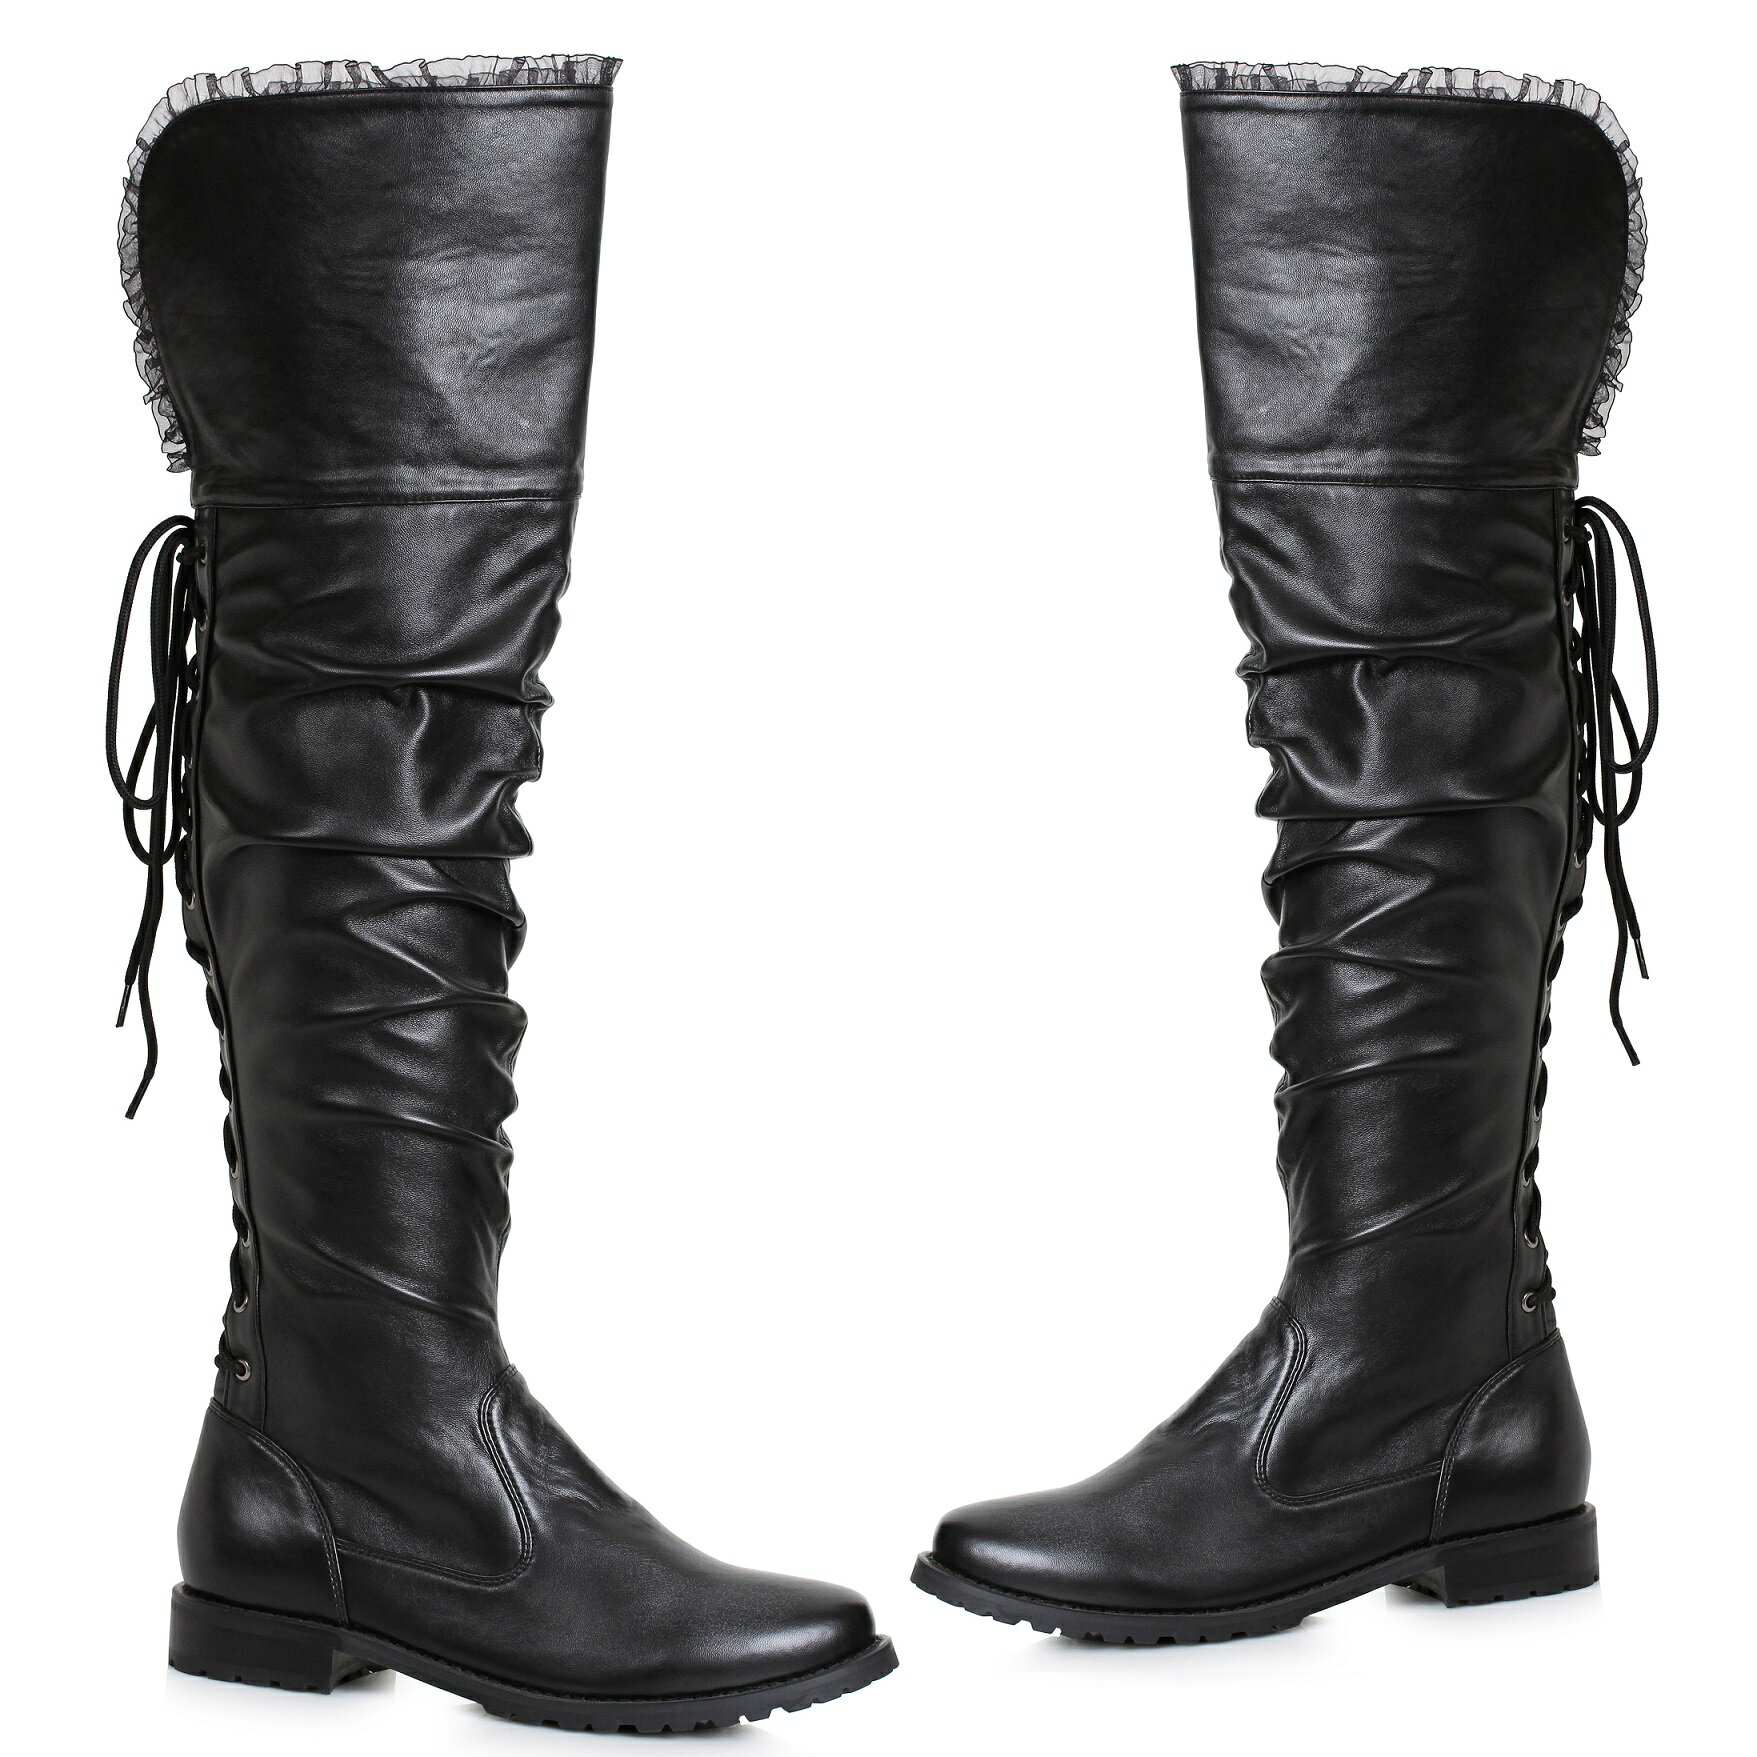 1031 by Ellie Shoes 181-TYRA　Women's Over The Knee Pirate Boot レディース オーバーニー パイレーツ ブーツ ハロウィンコスプレ ゴシック